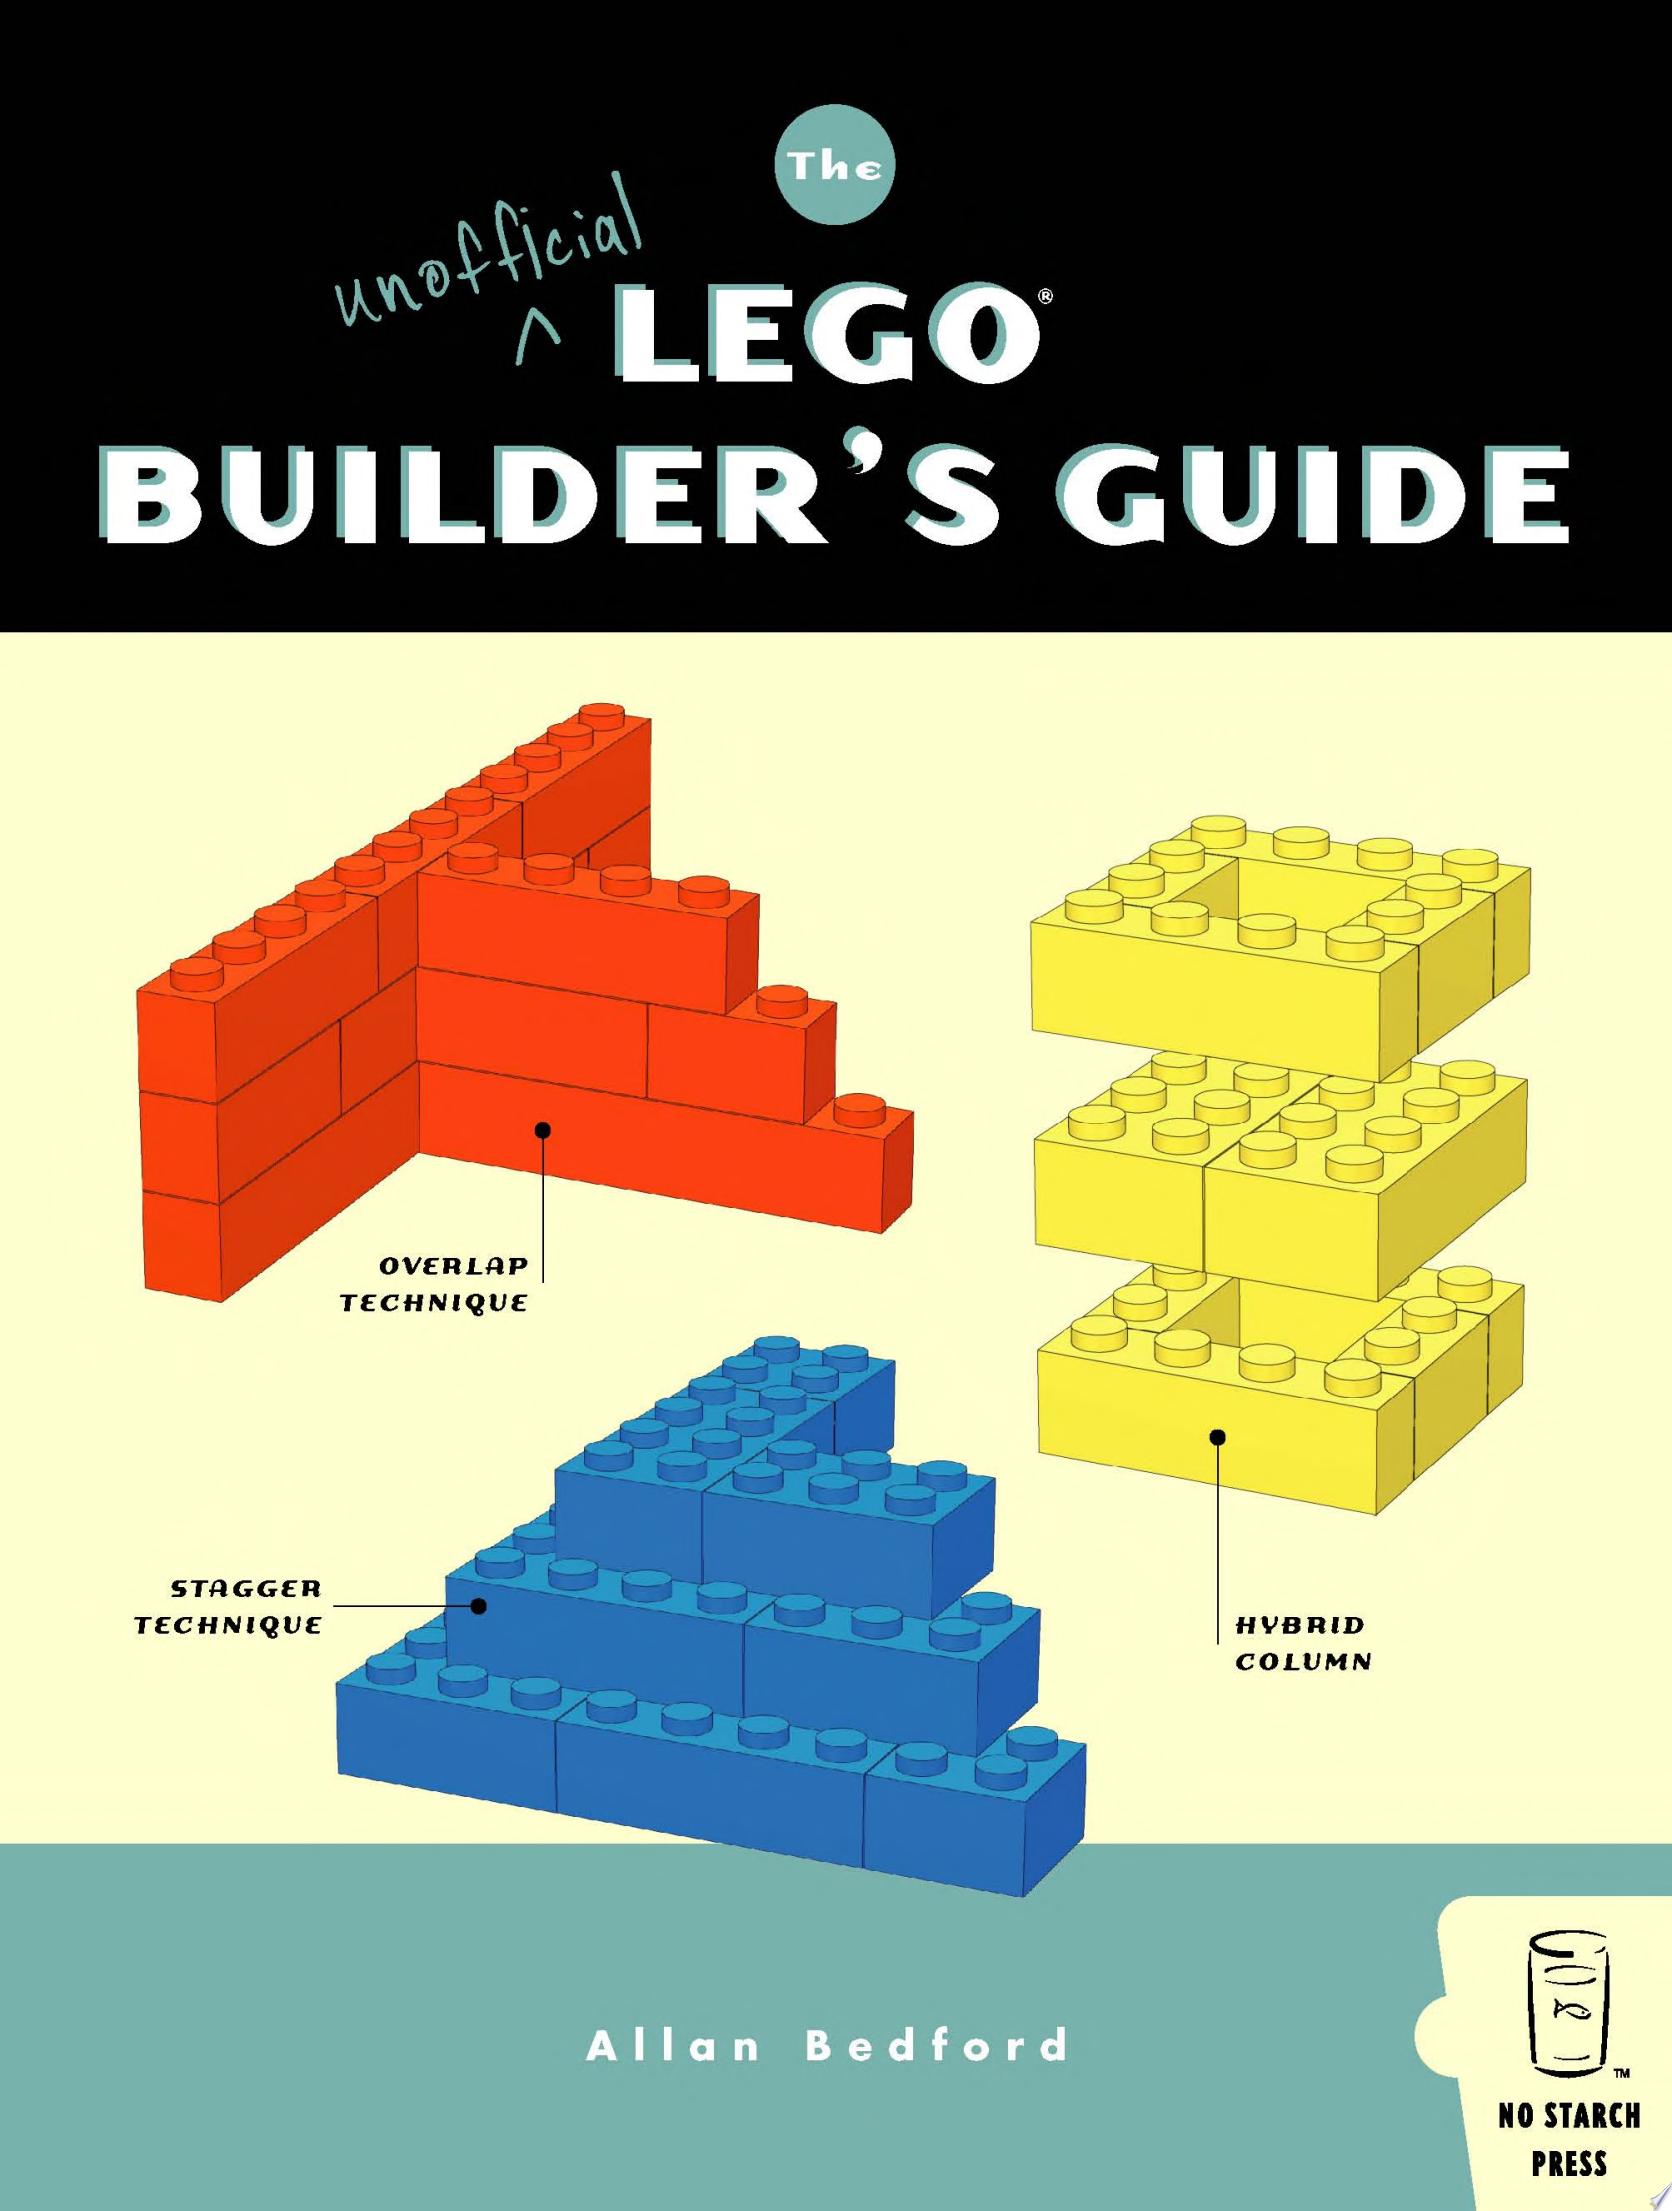 Image for "The Unofficial LEGO Builder's Guide"